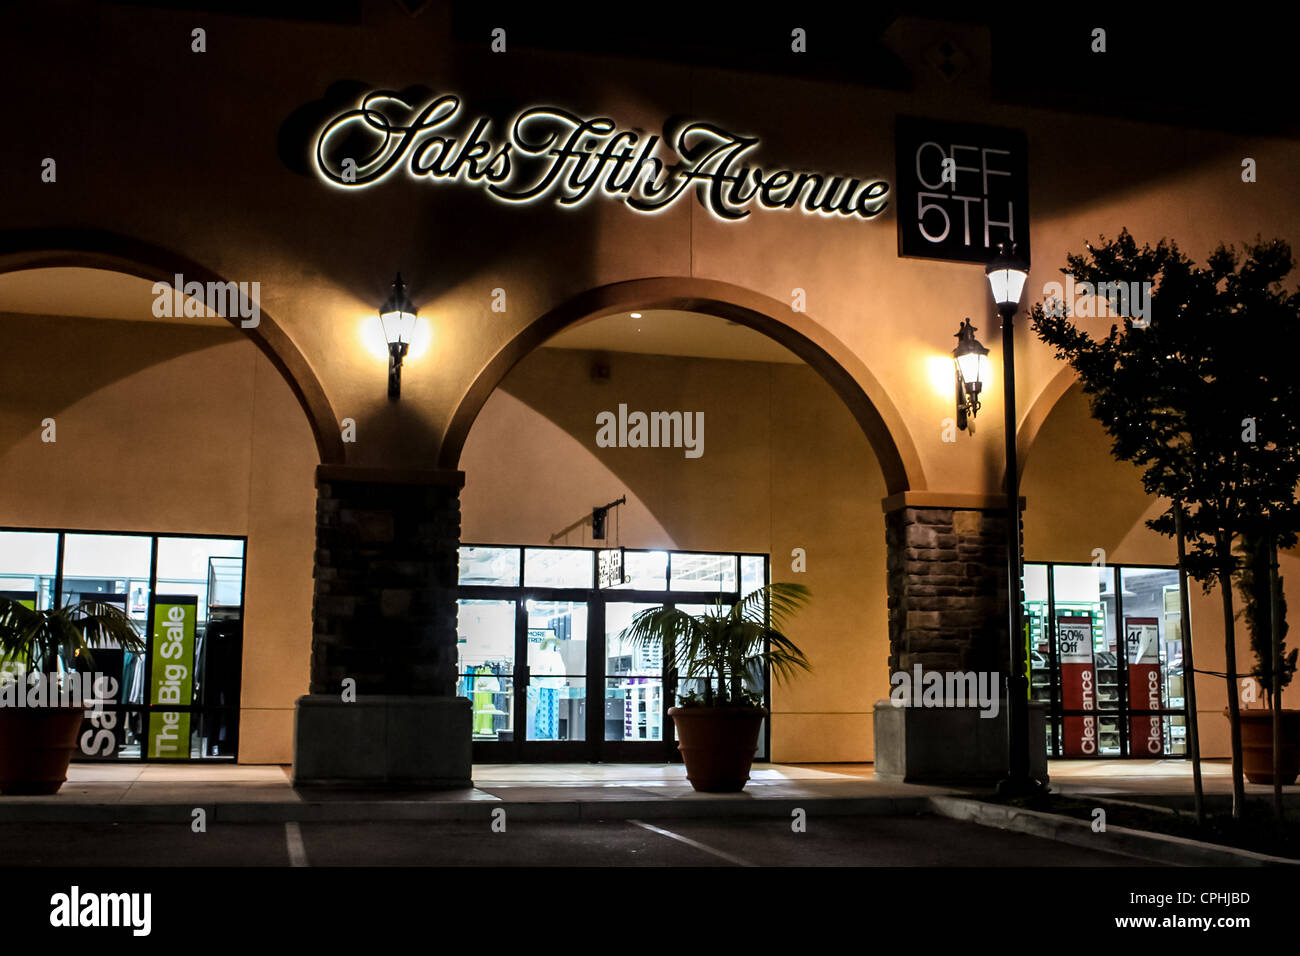 A Saks Fifth Avenue Off 5th outlet store in Camarillo California Stock Photo, Royalty Free Image ...